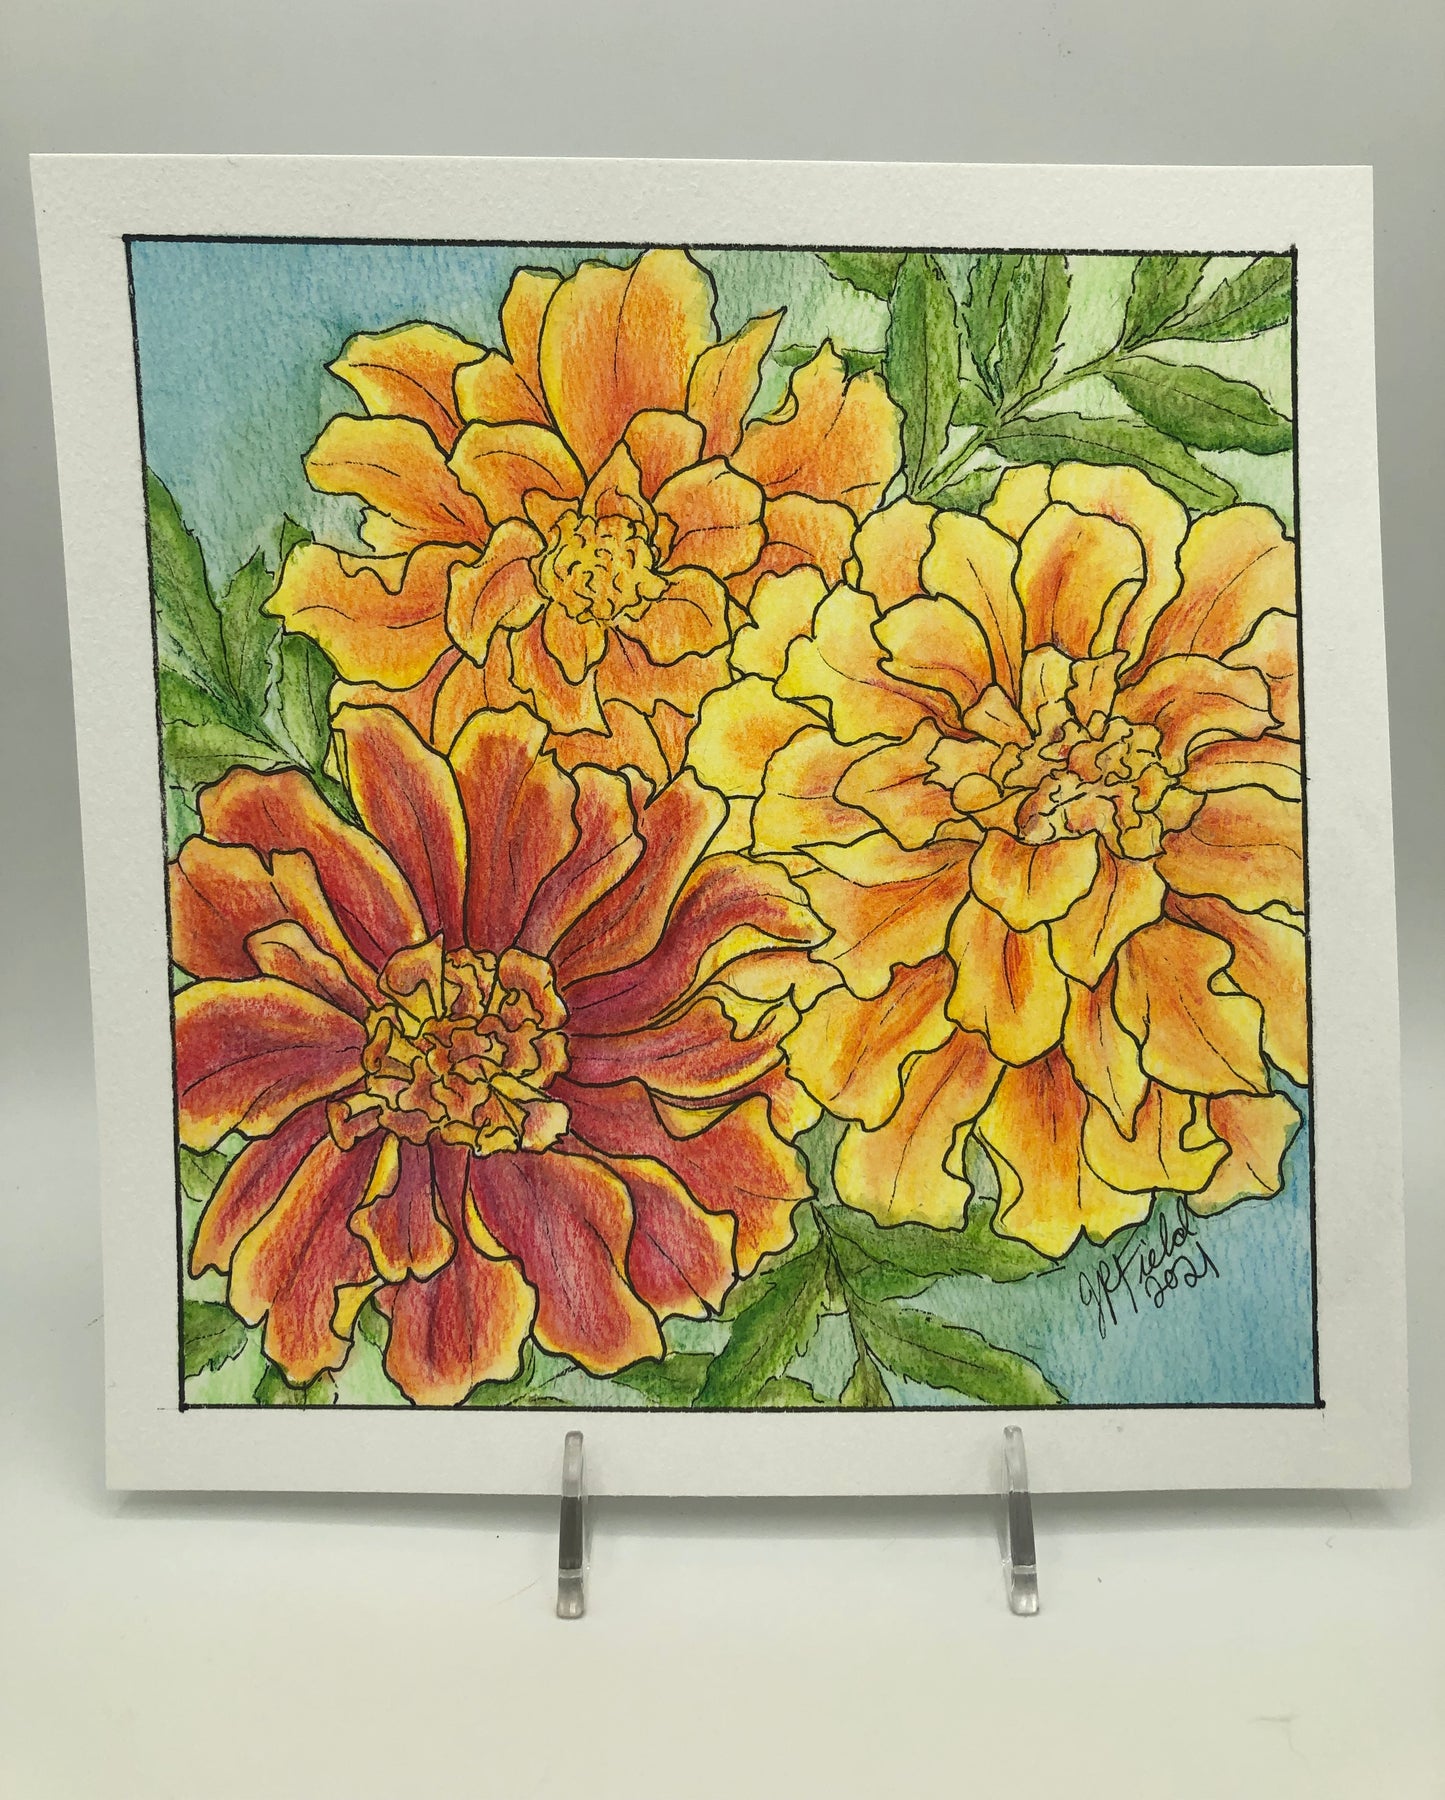 Marigolds from Blossoms & Blooms Vol 1